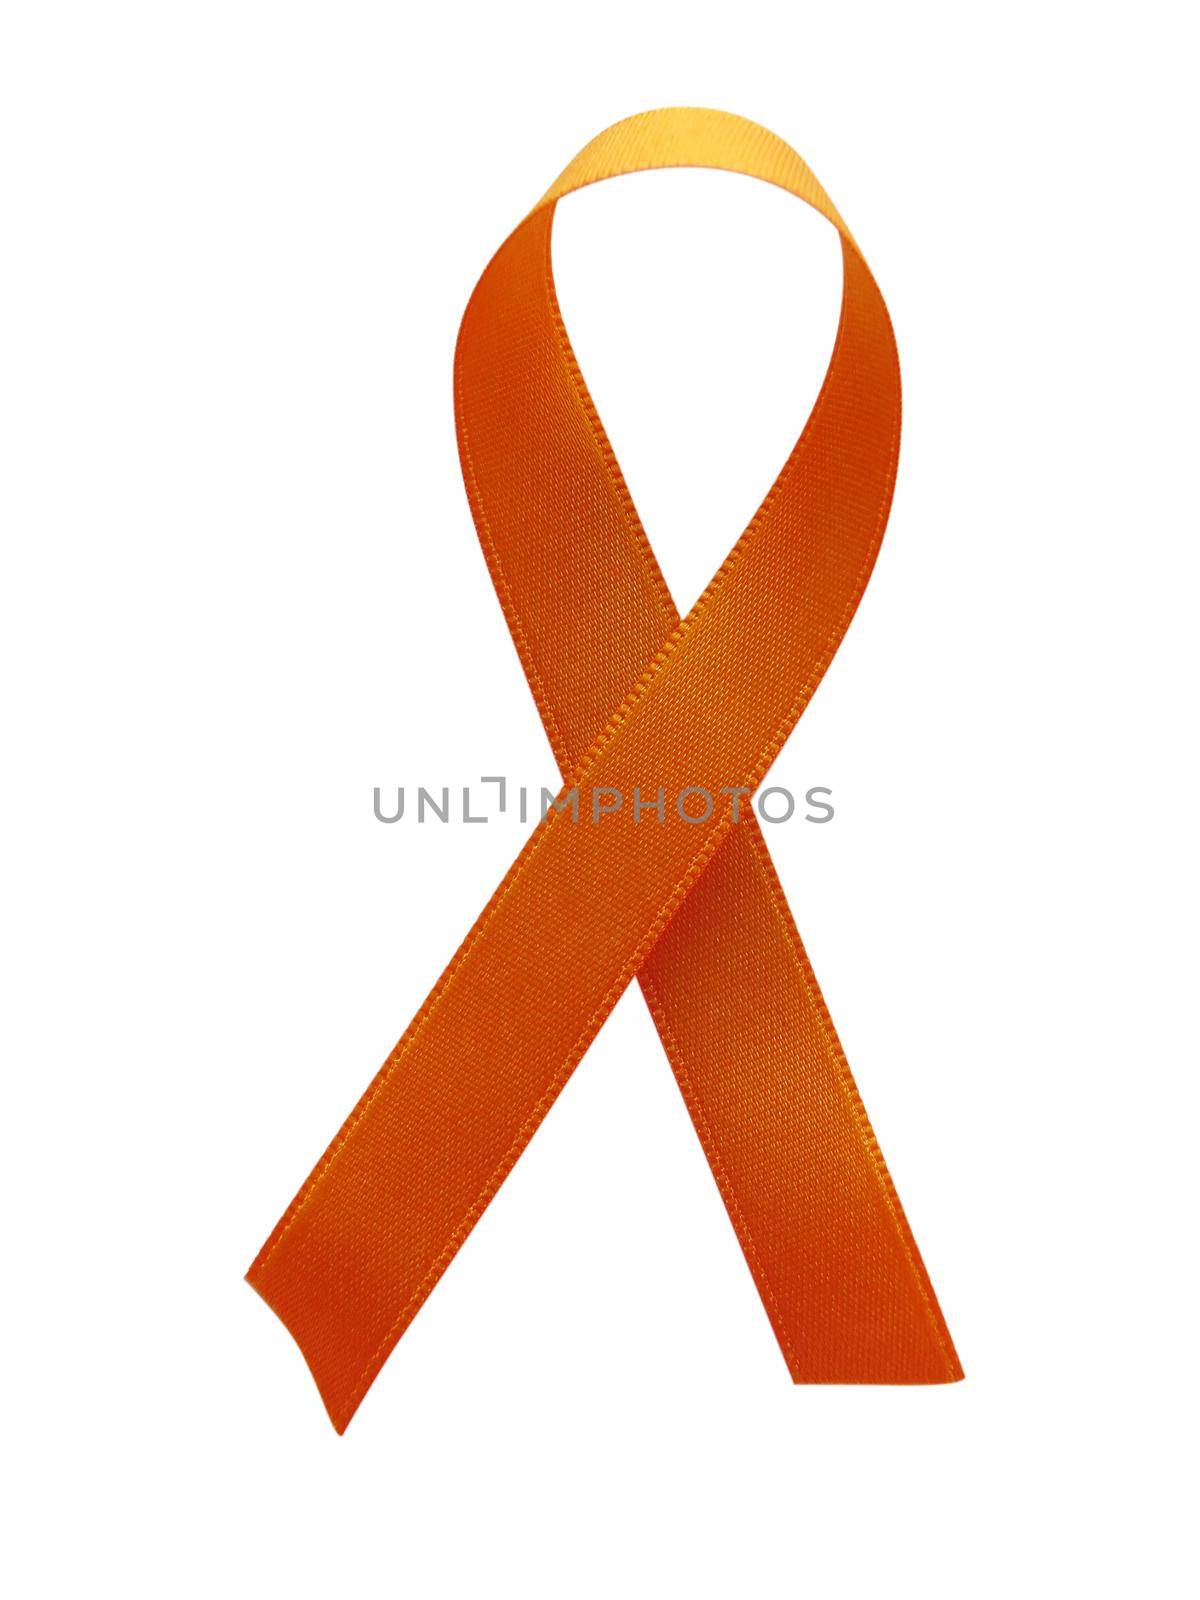 Orange-Cooper ribbon awareness isolated on white background. Clipping Path included